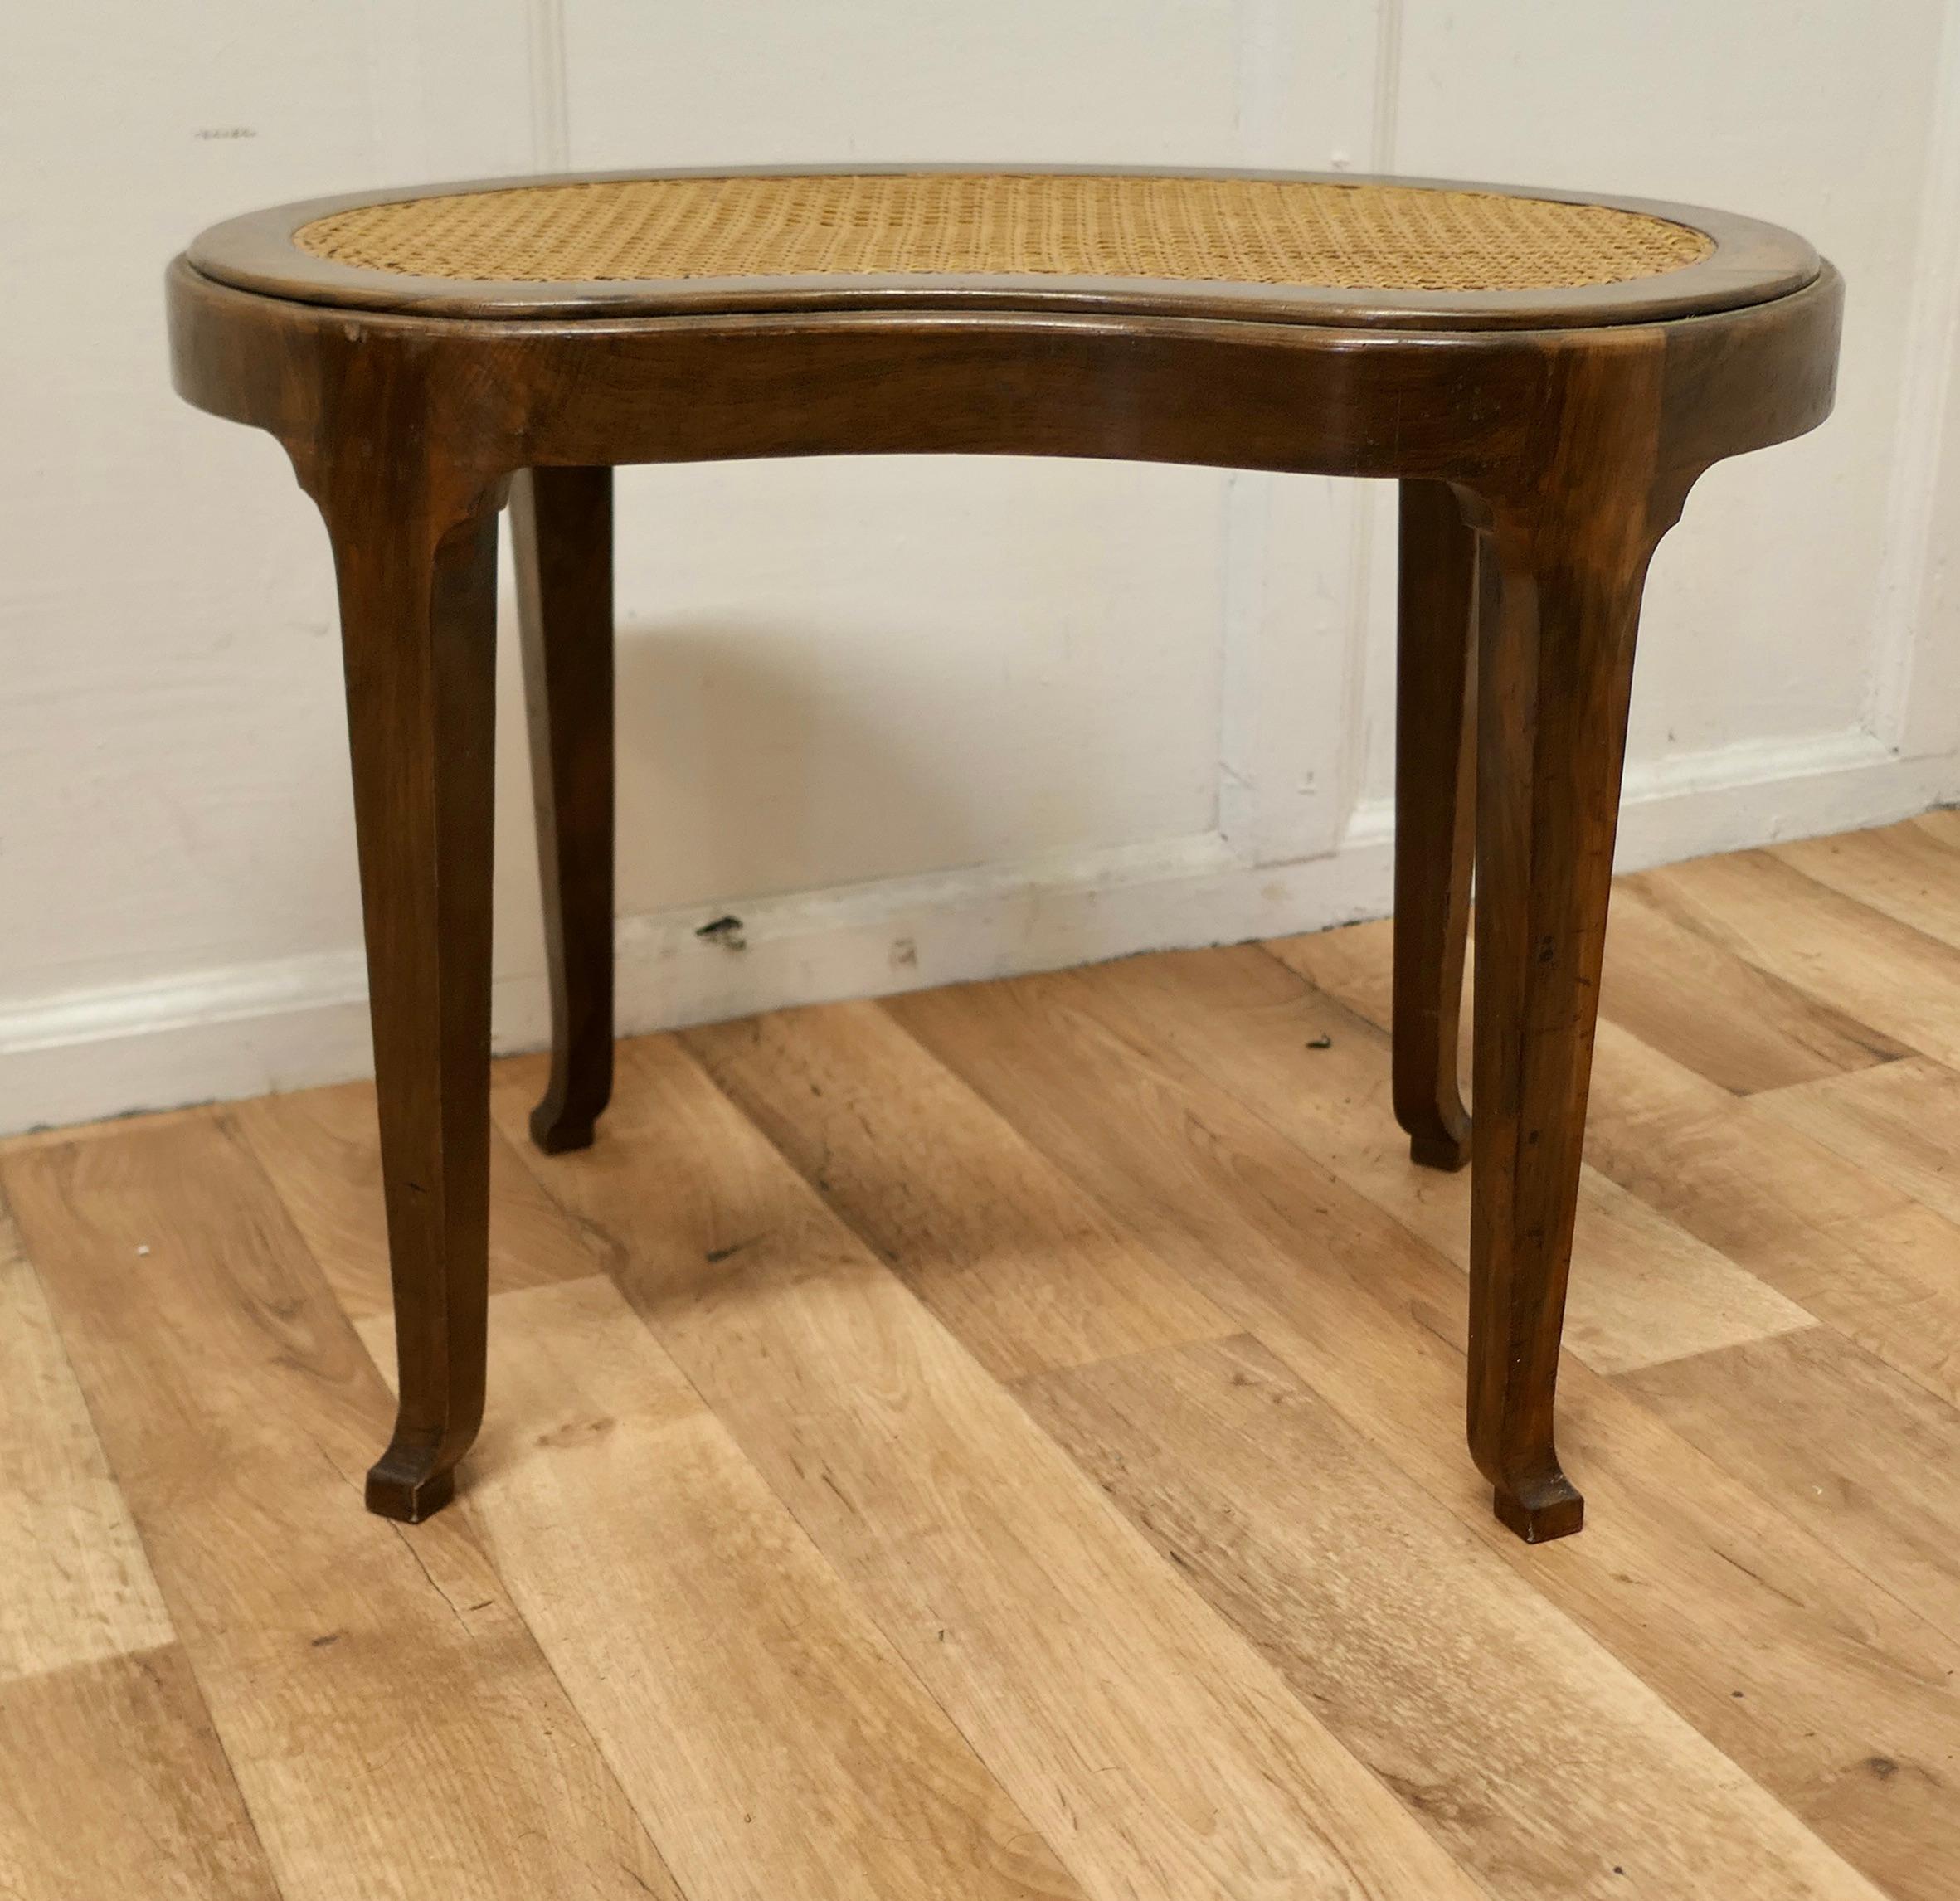 French Empire style Bergère kidney shaped stool.

This is a charming French empire style walnut stool, the stool has a charming golden colour and a very attractive shape, the seat is made with flat cane often known a bergère 
This is a dainty